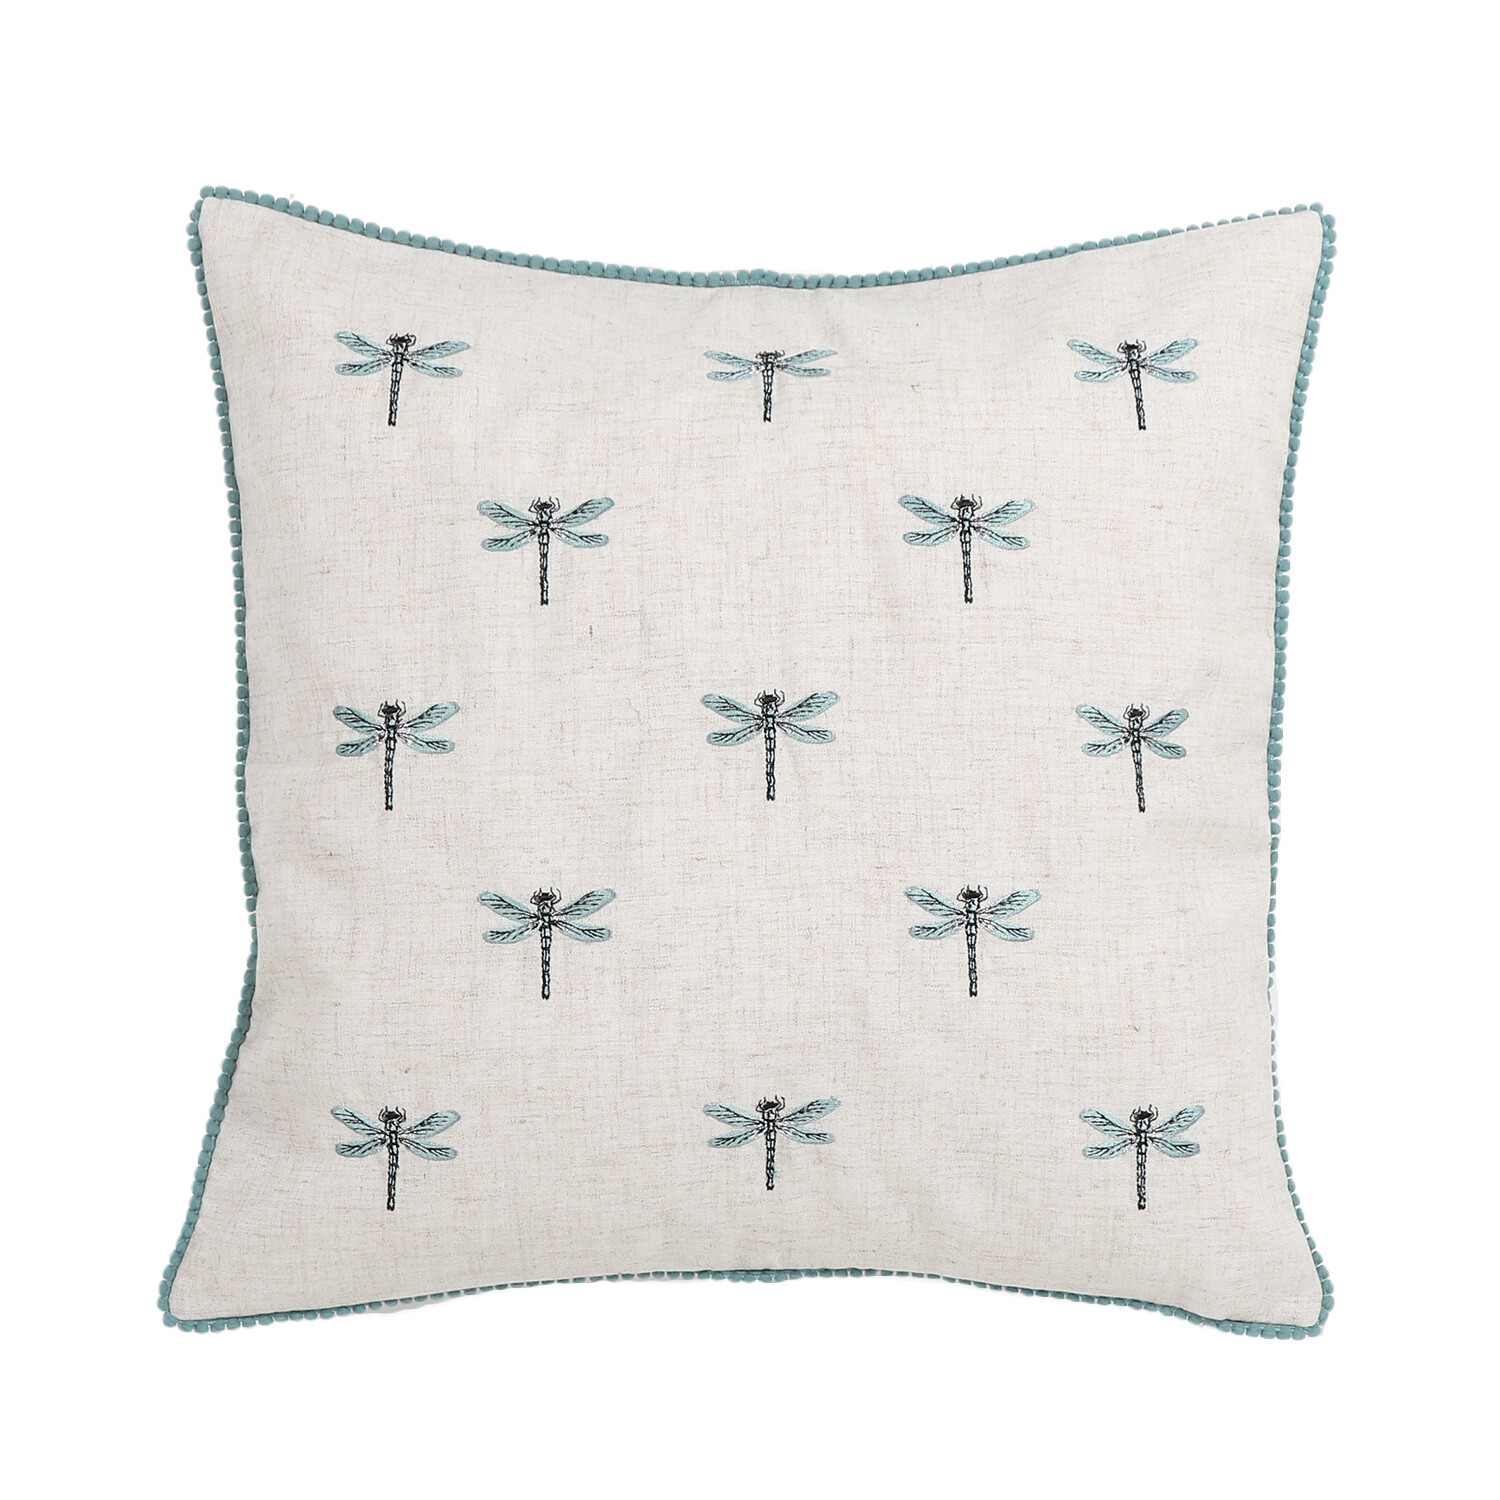 Divante Natural Dragonfly Embroidered Cushion 45 x 45cm Image